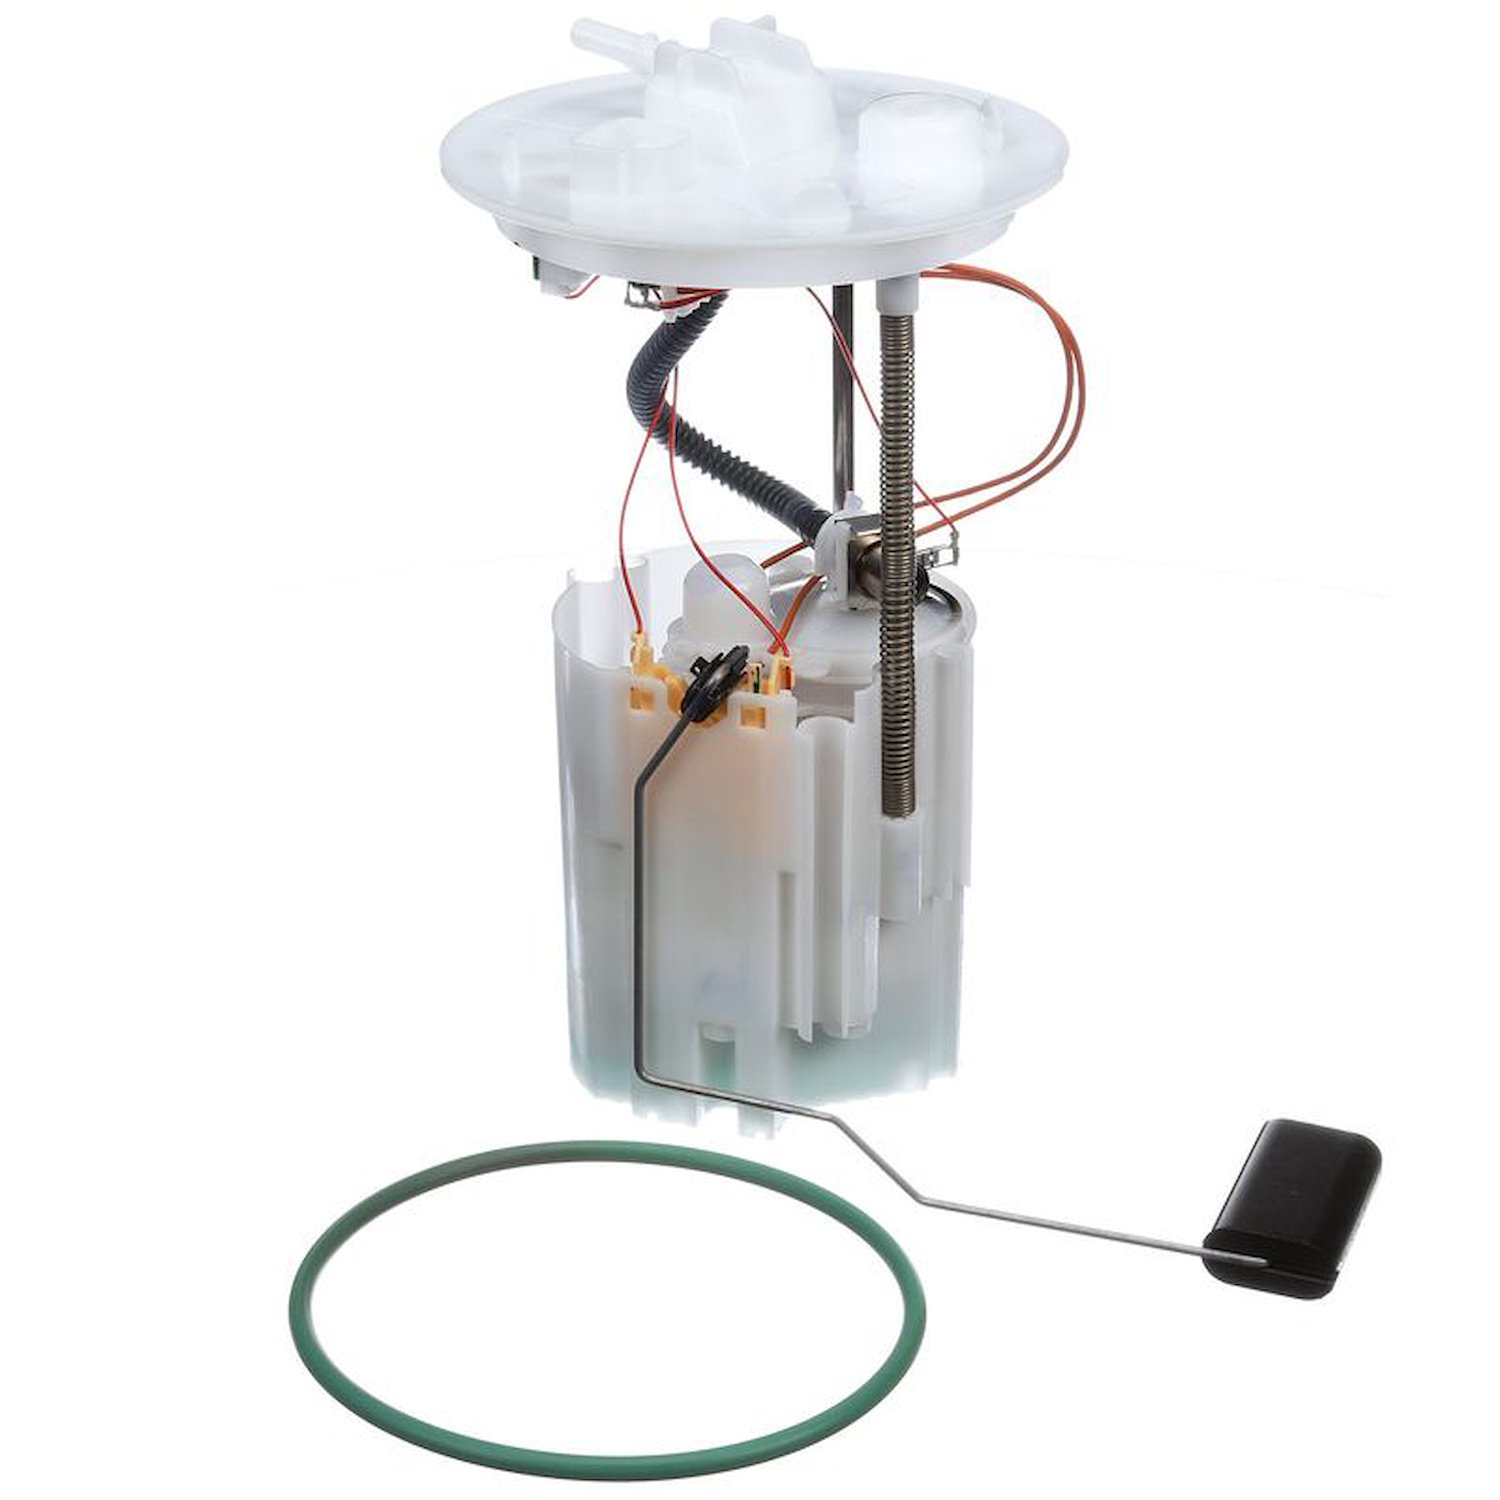 OE Ford/Lincoln Replacement Fuel Pump Module Assembly for 2013-2016 Ford Escape/2015-2016 Lincoln MKC